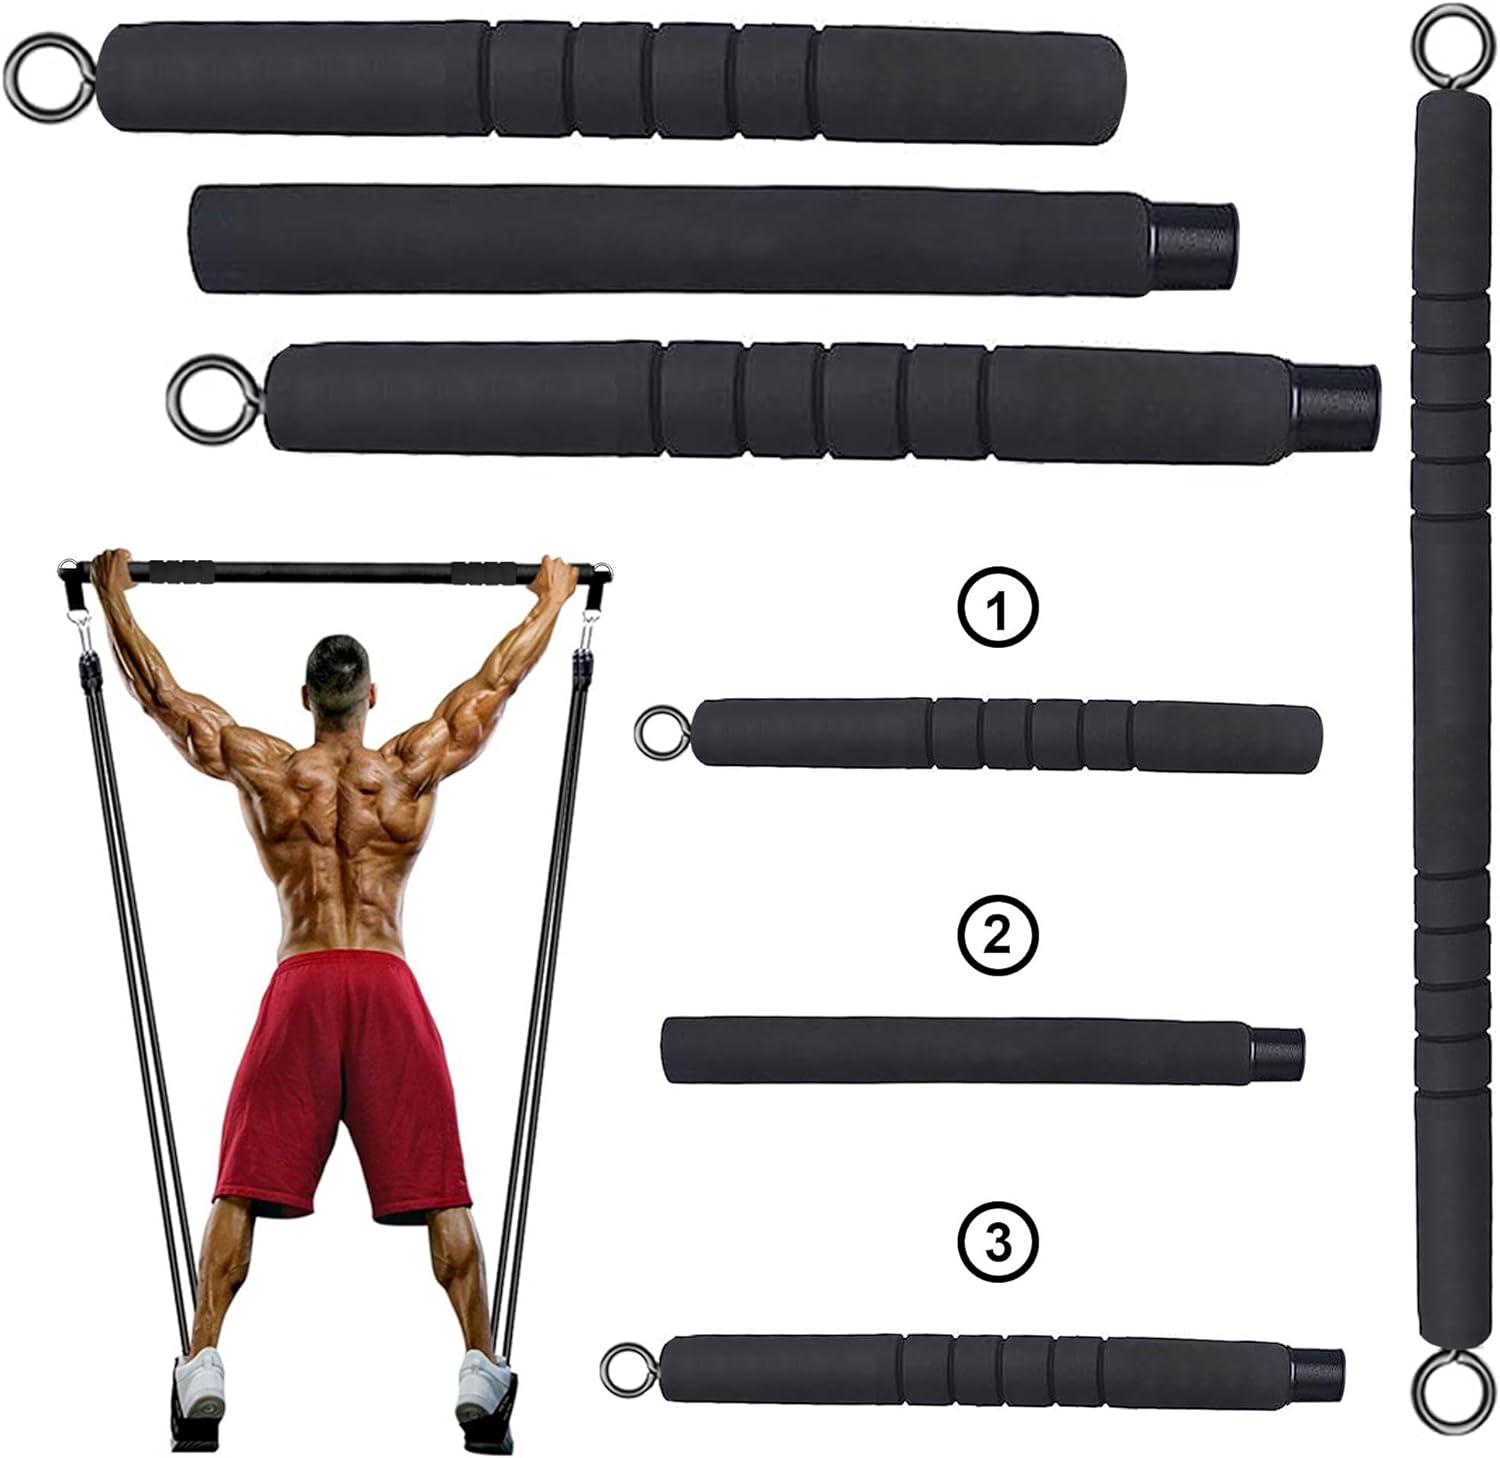 Portable 3 Piece Bar for Resistance Bands - Pilates -  Home Gym - Carrying Case Included